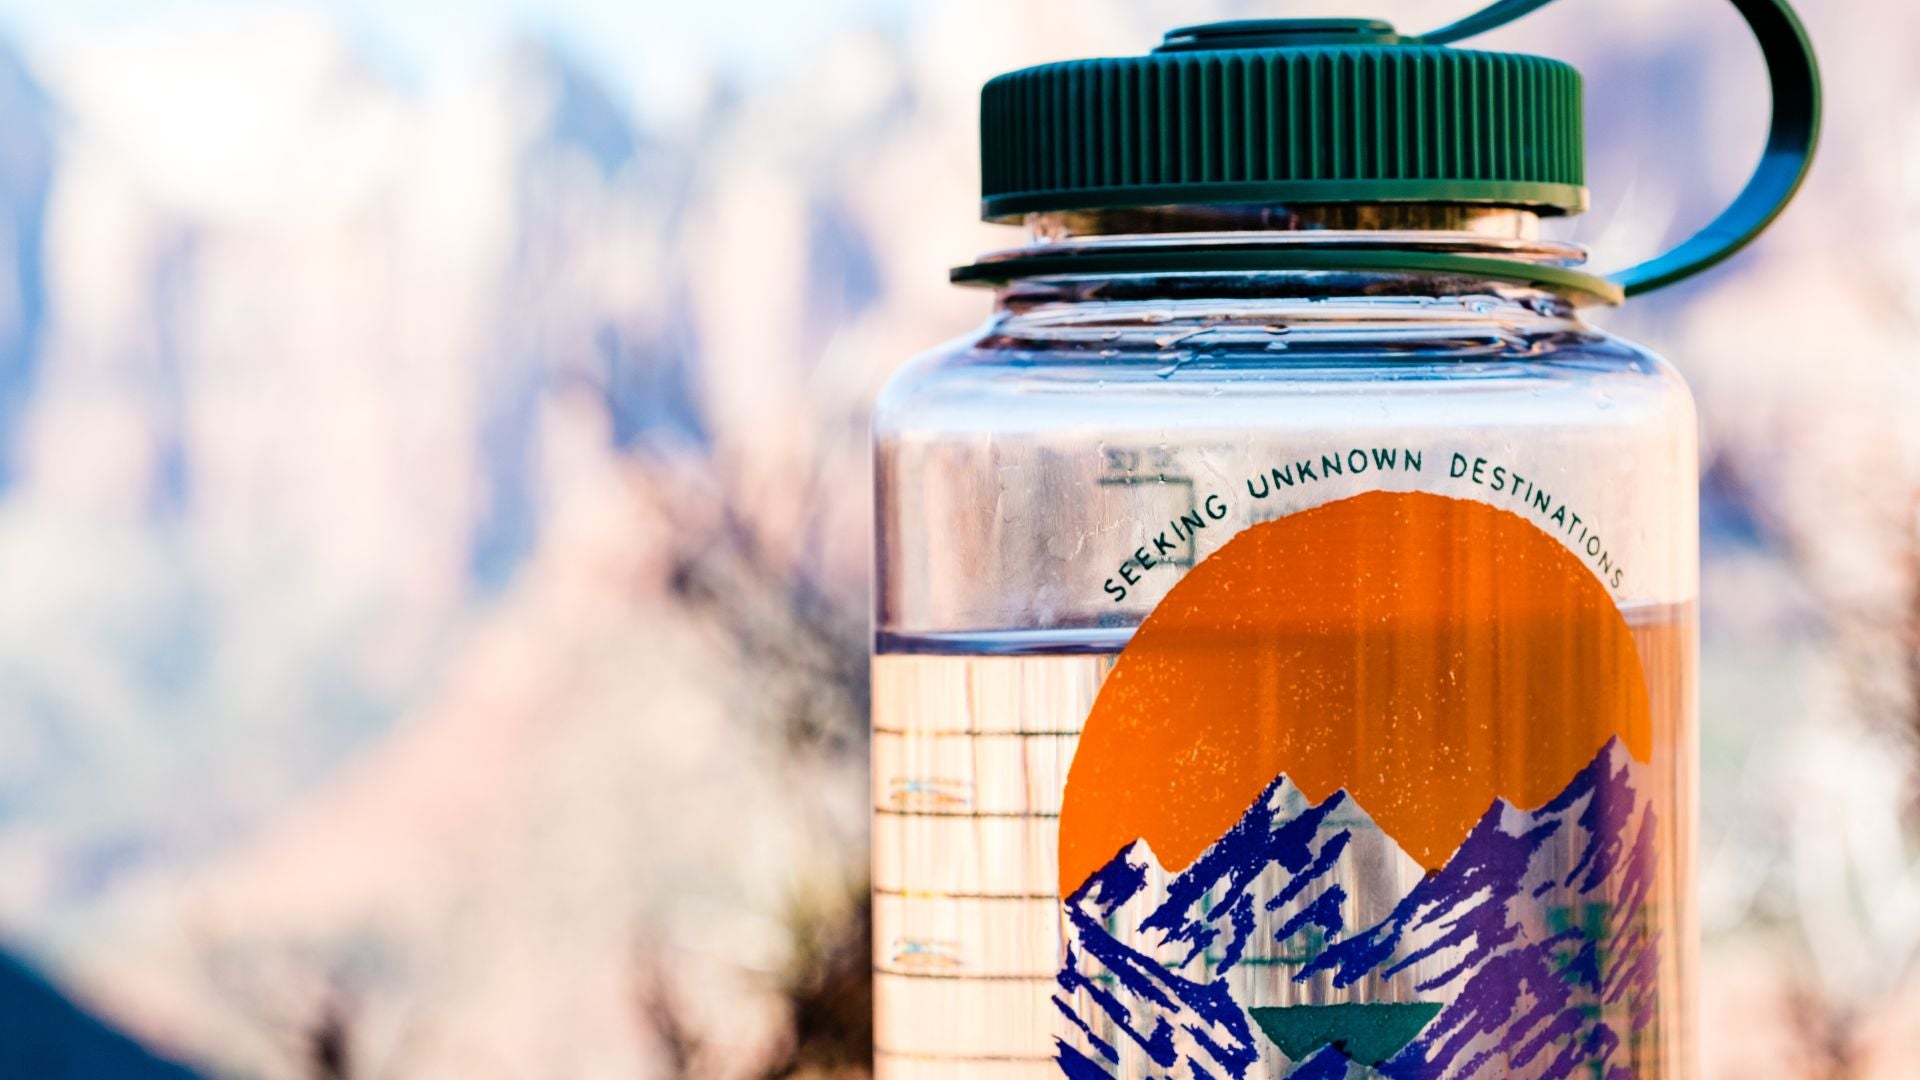 5 Tips to Prevent Dehydration While Hiking